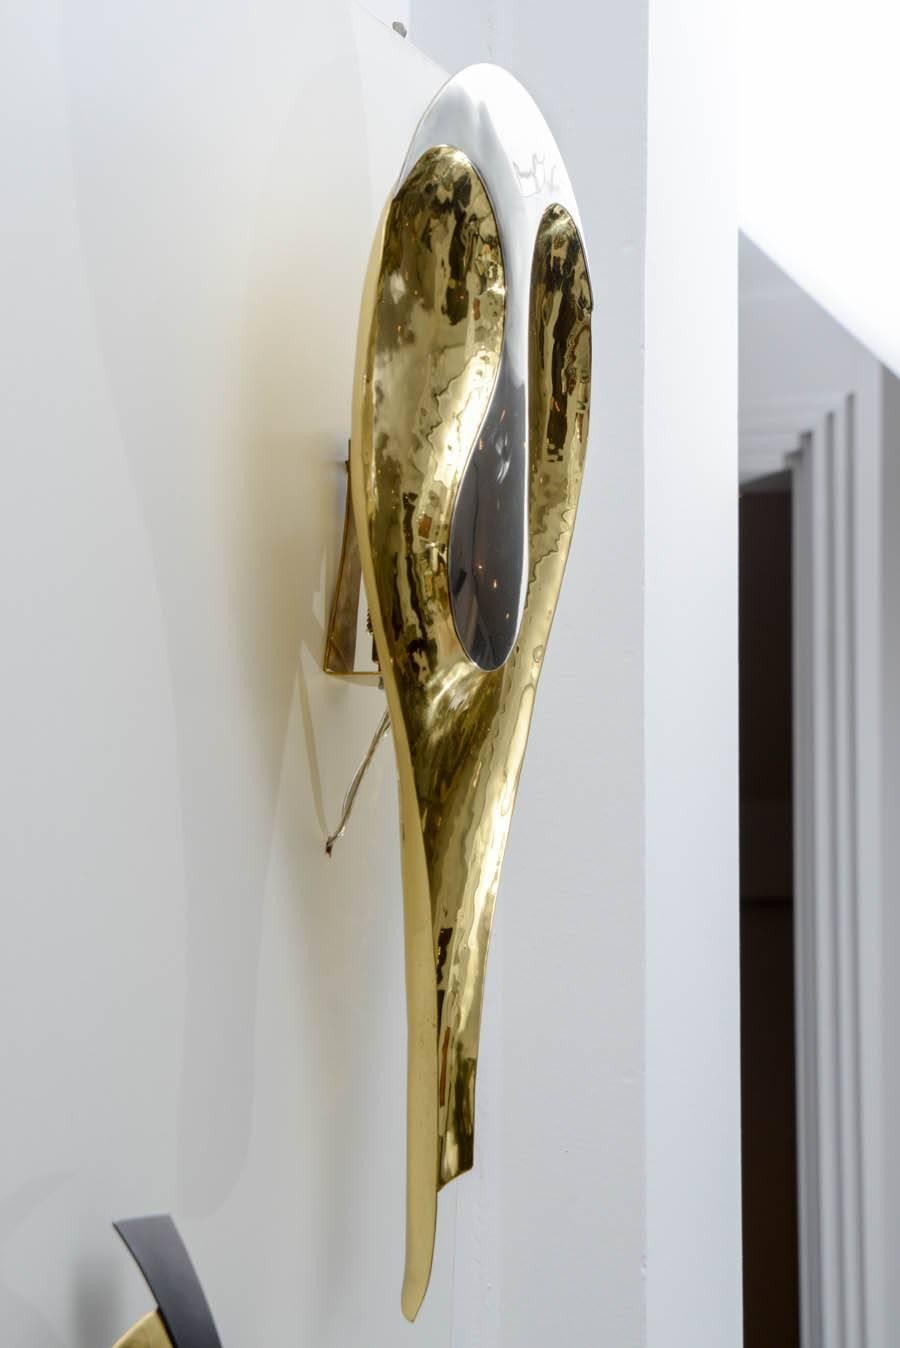 Fantastic dinandery, electrified sconce by Perrichaud (French dinandier active during the 1960), double patina, gold and silver,
a sculpture as much as a lamp.